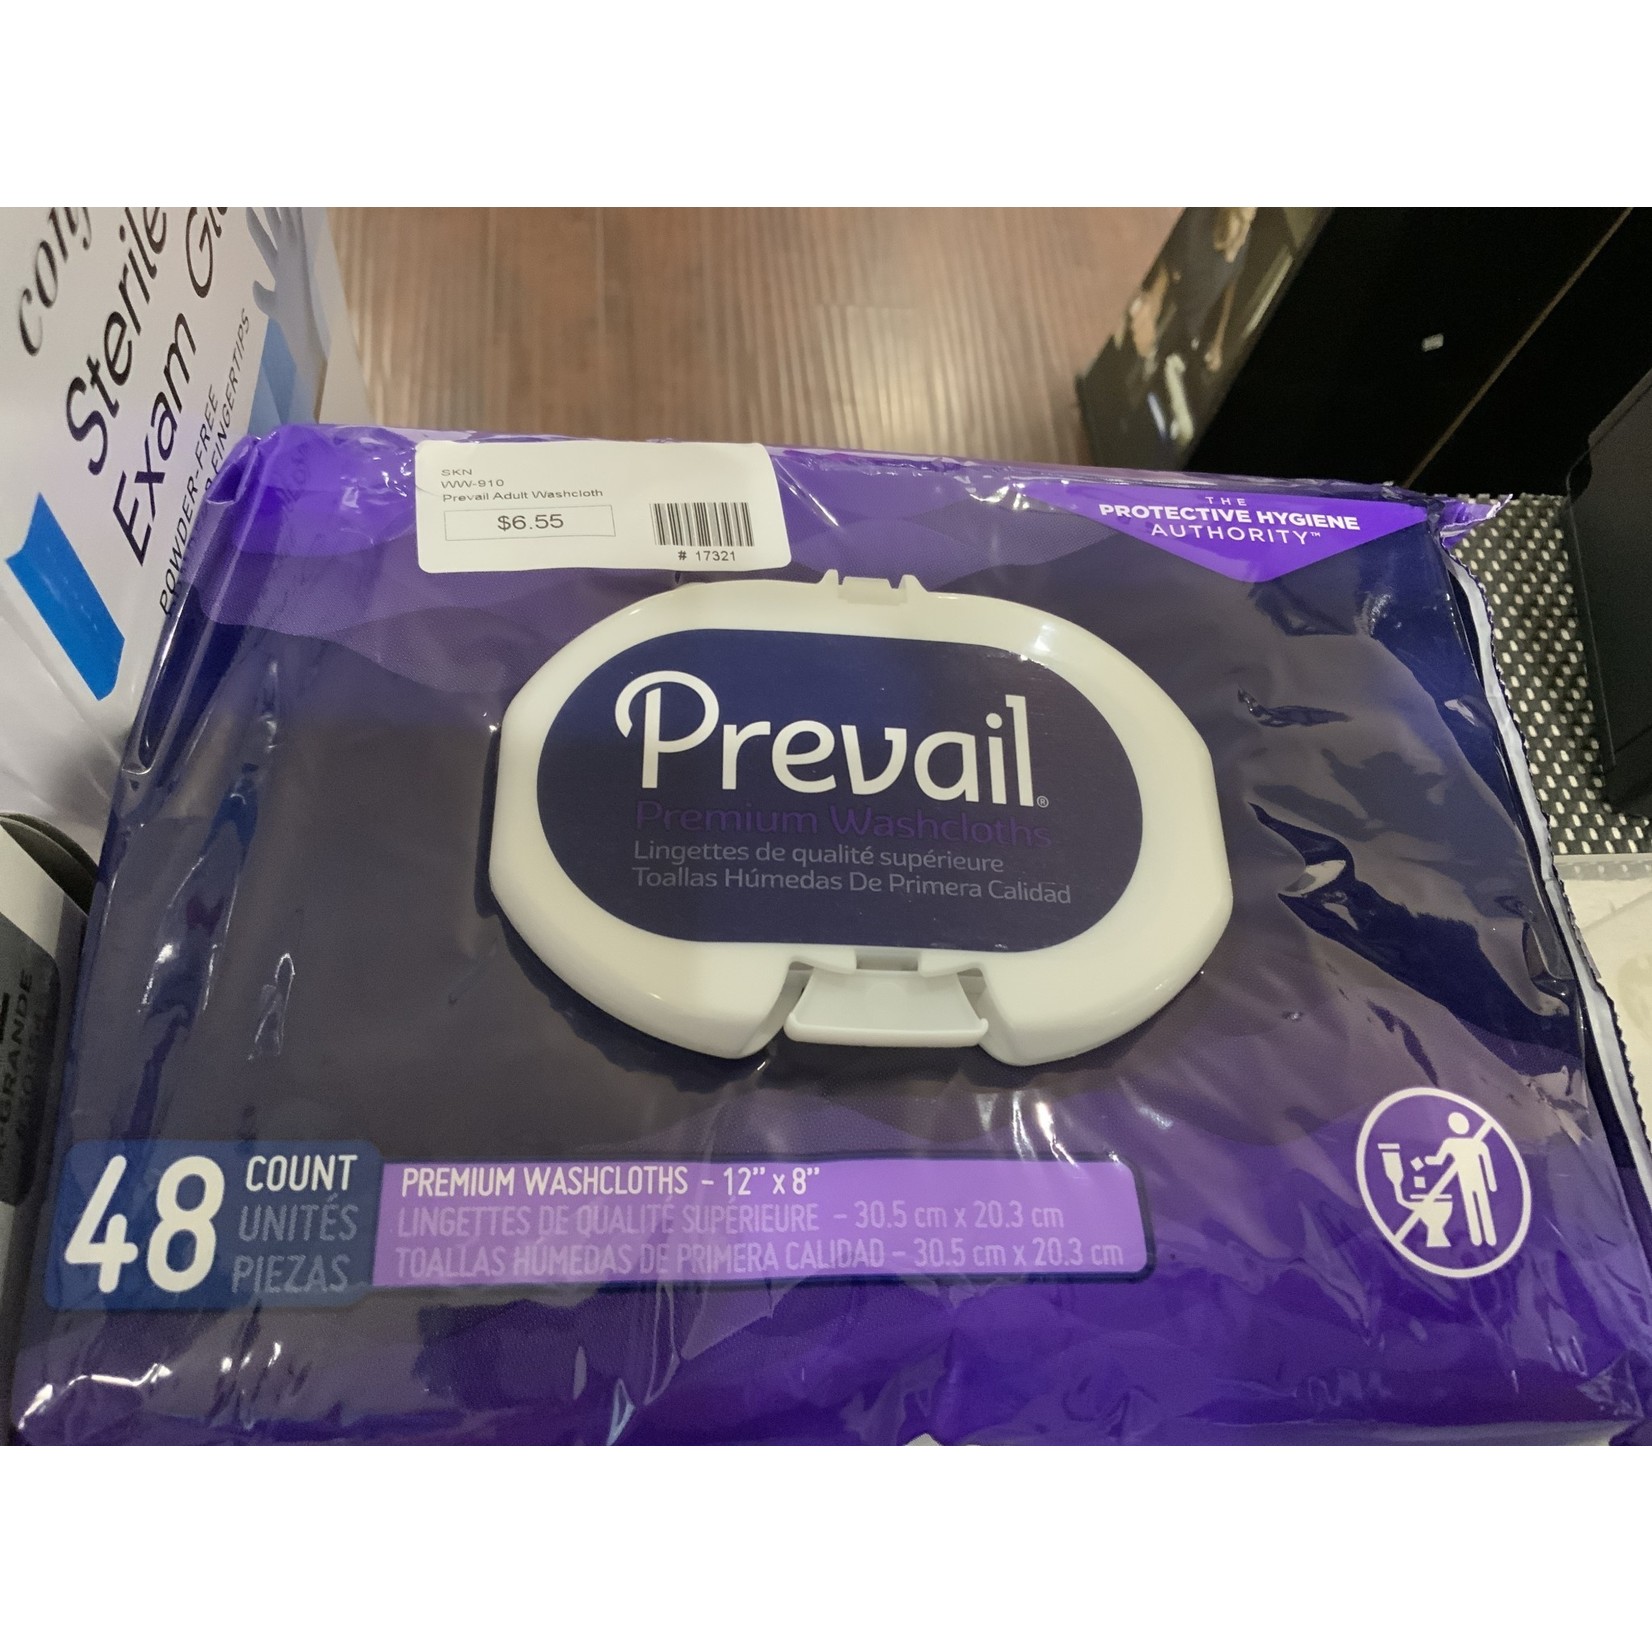 Prevail Personal Wipe Prevail Soft Pack Aloe / Vitamin E Unscented 48 Count